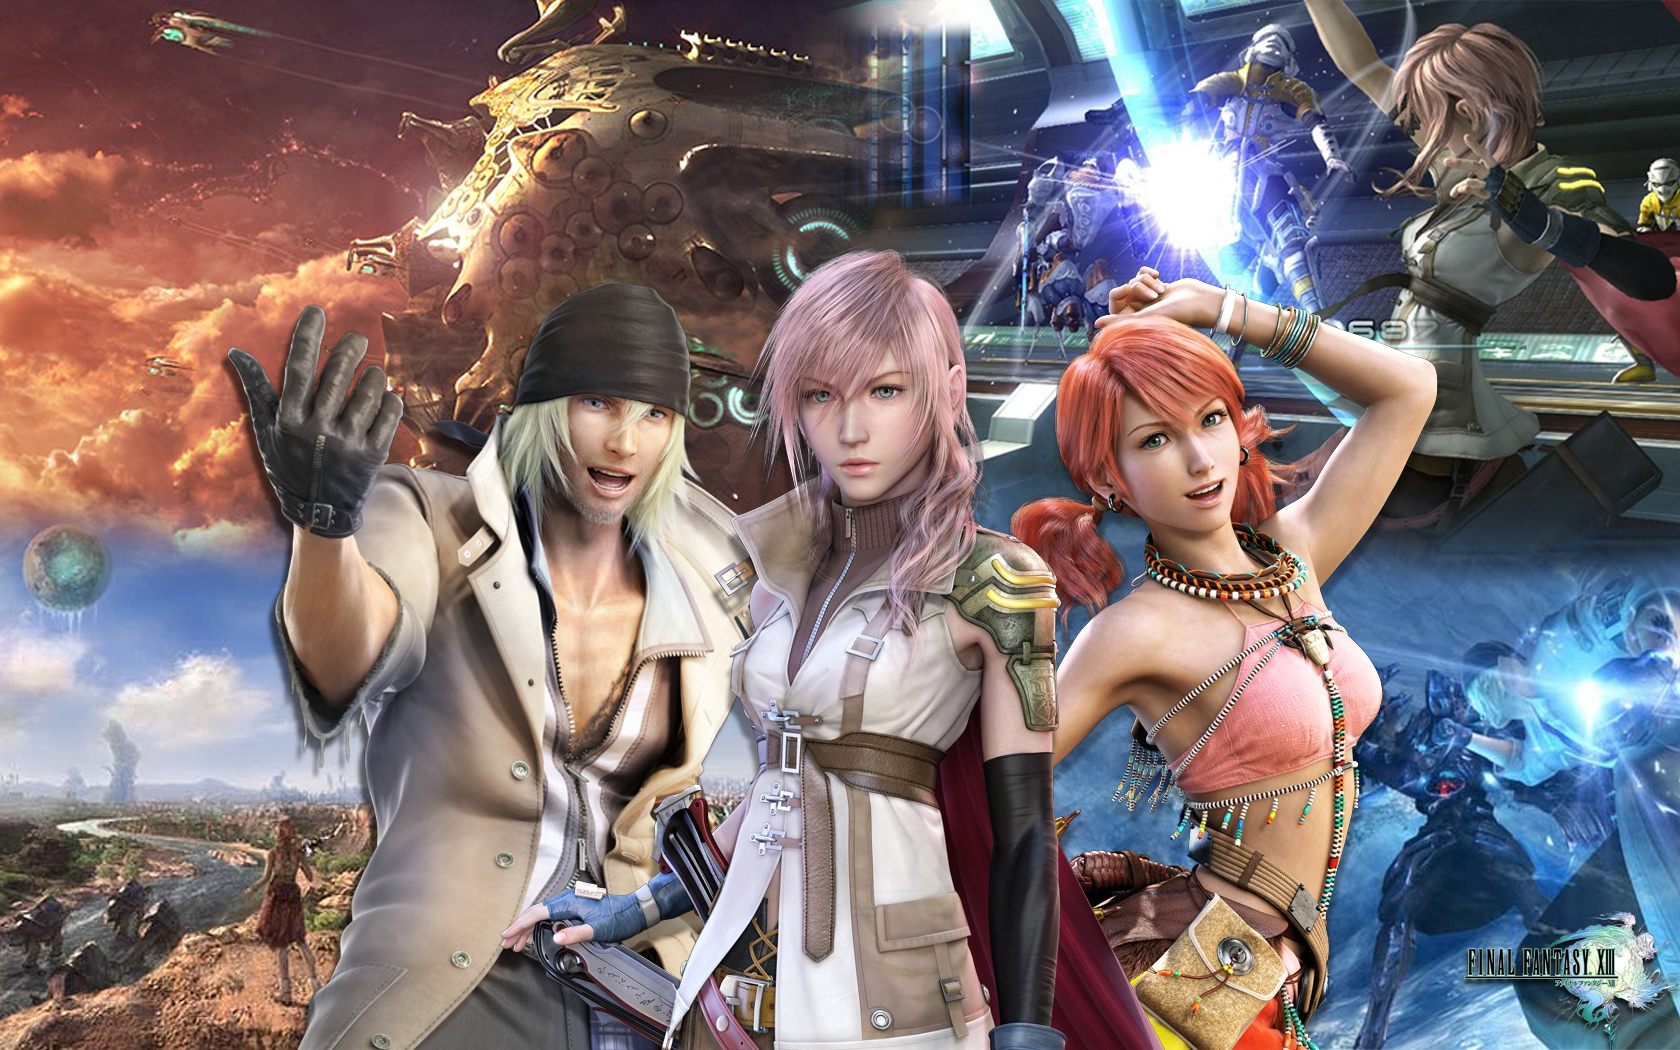 final fantasy xiii wallpaper,action adventure game,pc game,games,cg artwork,strategy video game